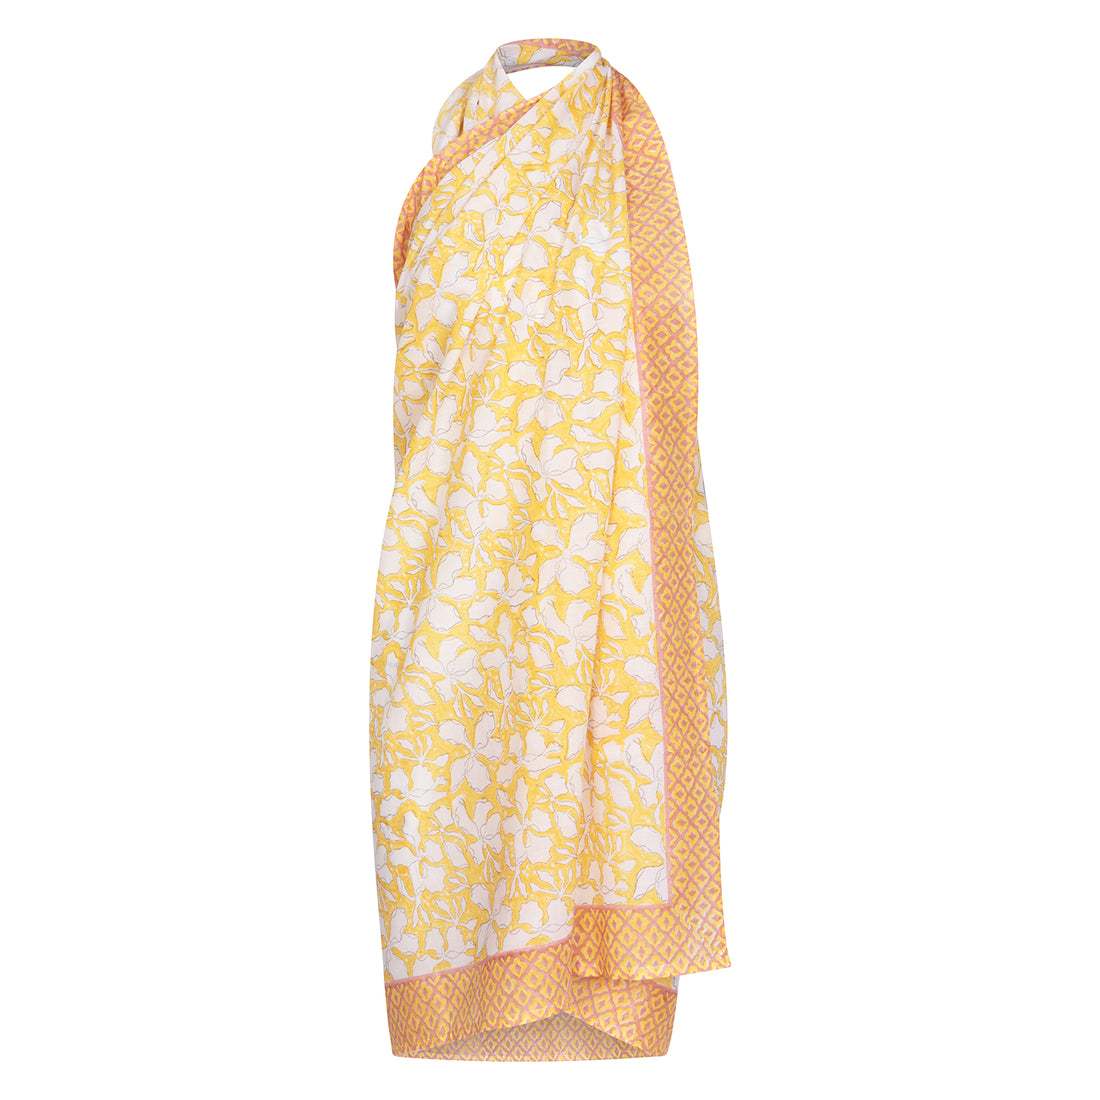 Buttercup Tile Sarong - One Size - Yellow/White